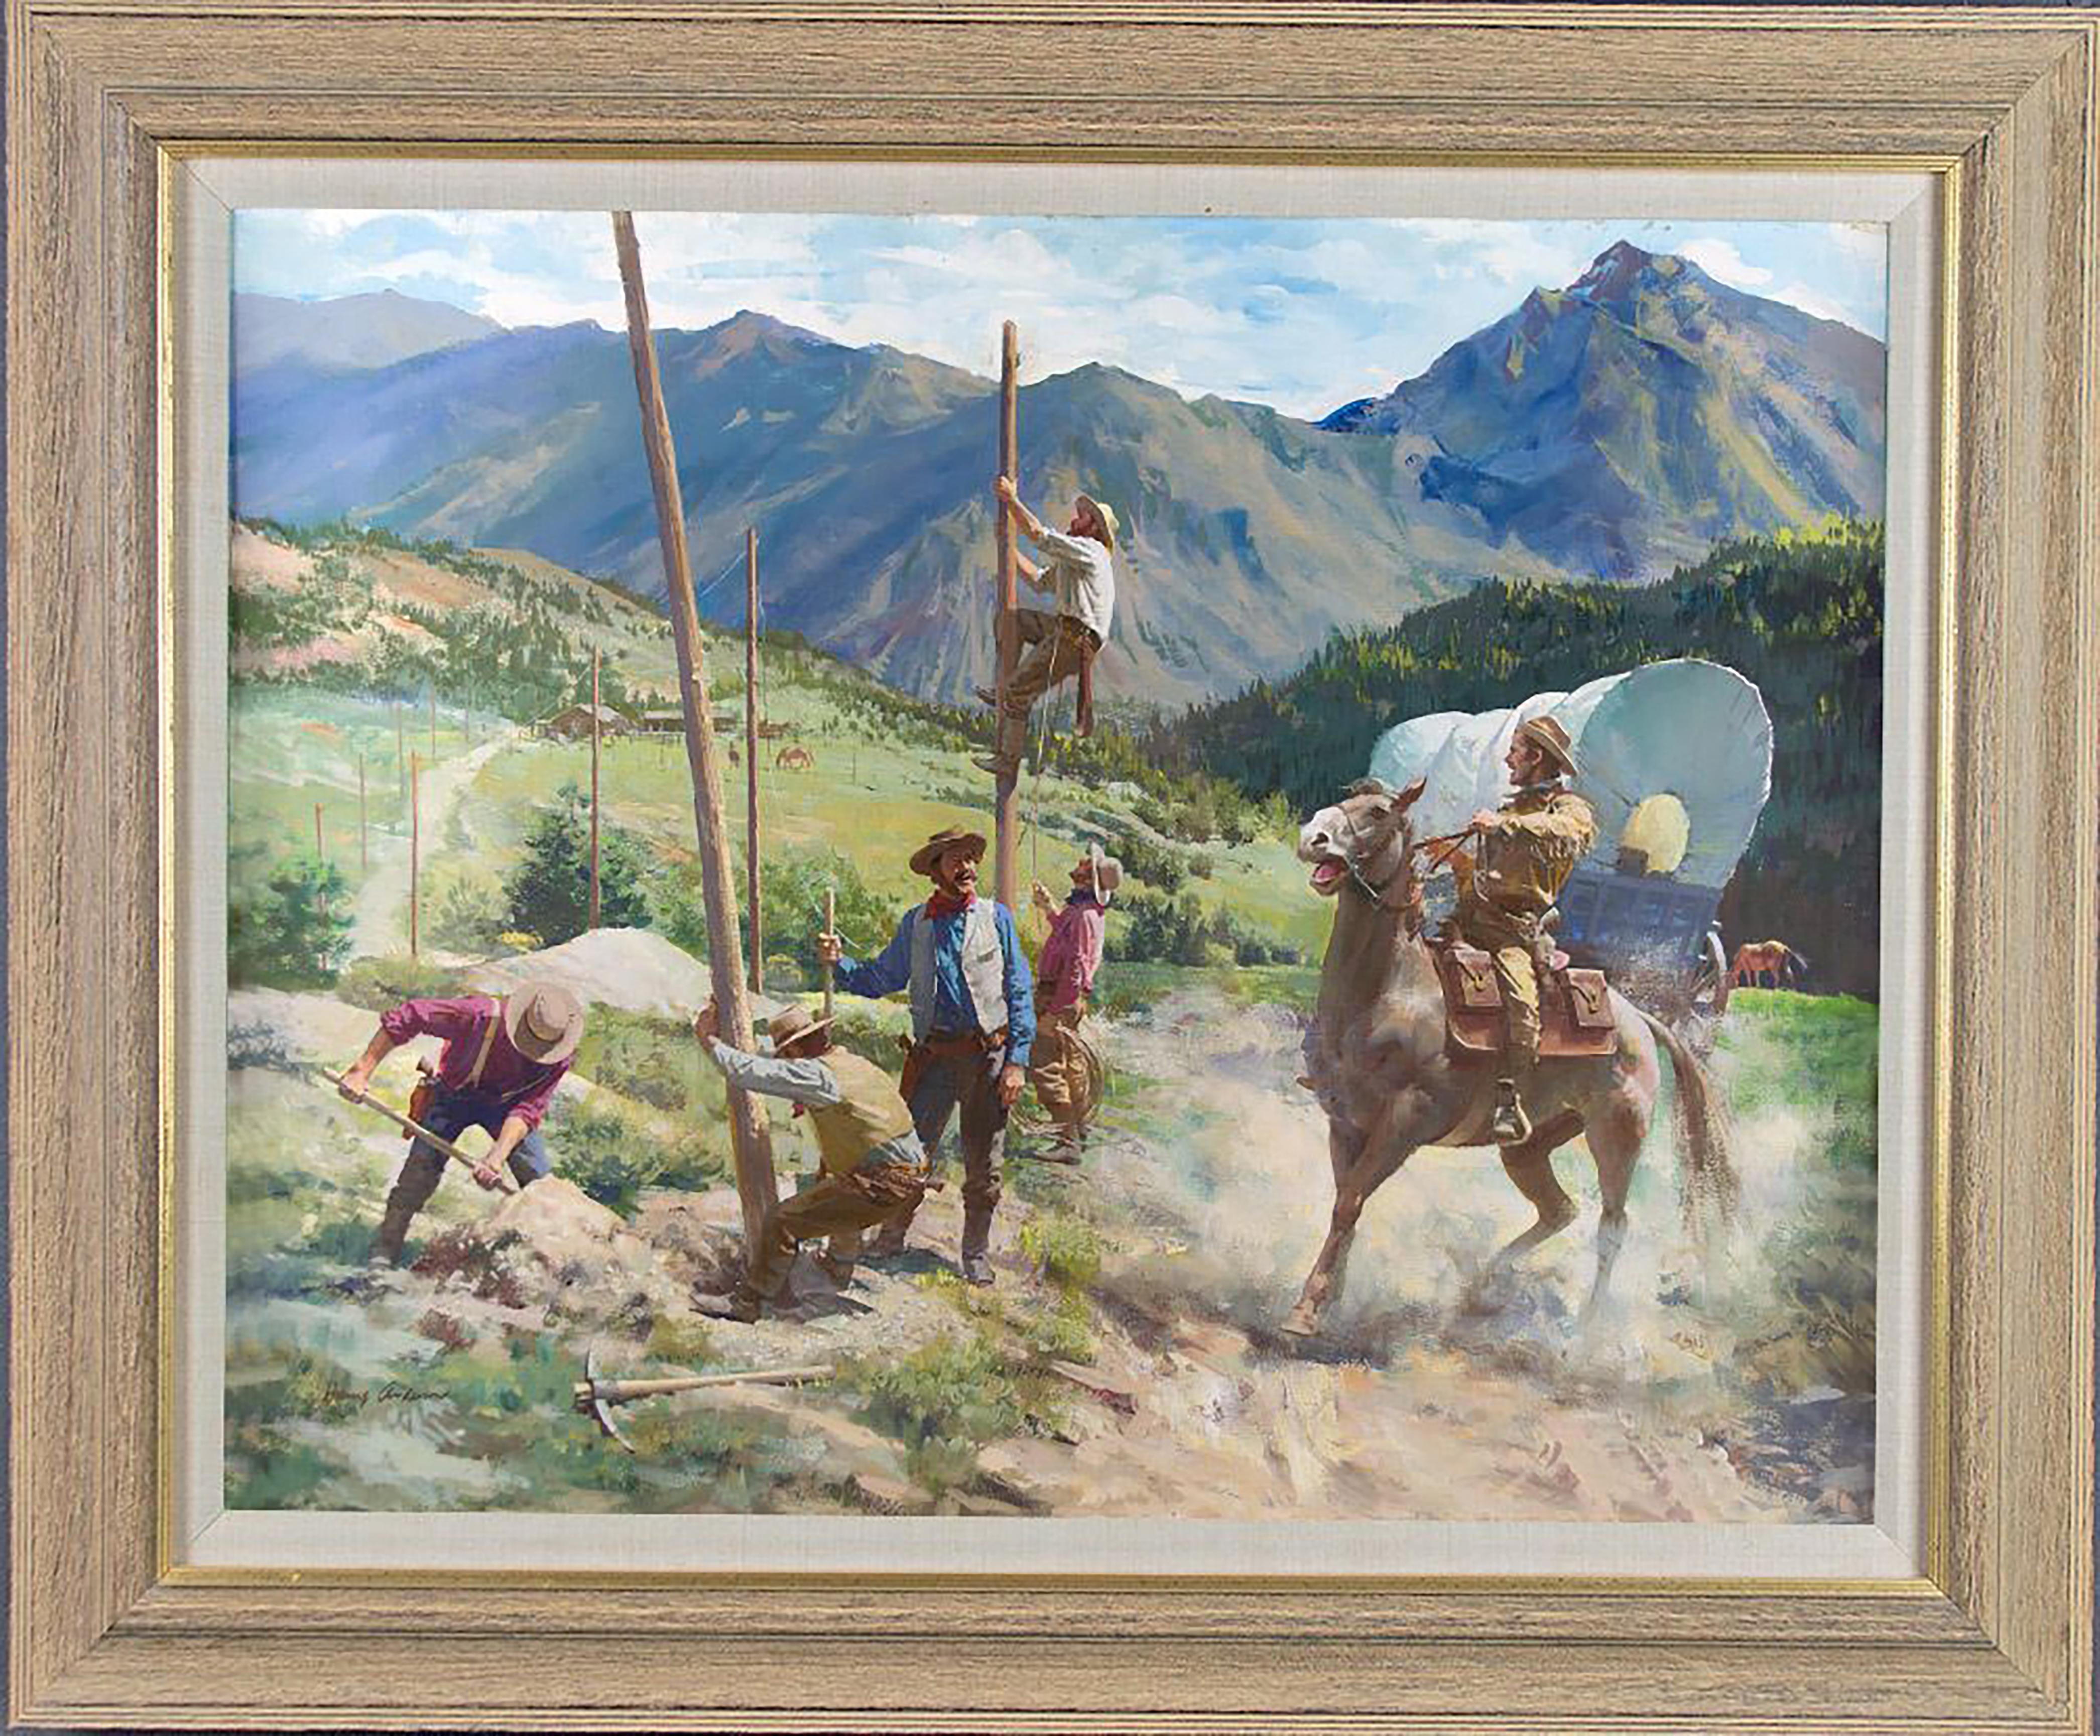 Talking Wires Take Over from the Pony Express  - Painting by Harry Anderson